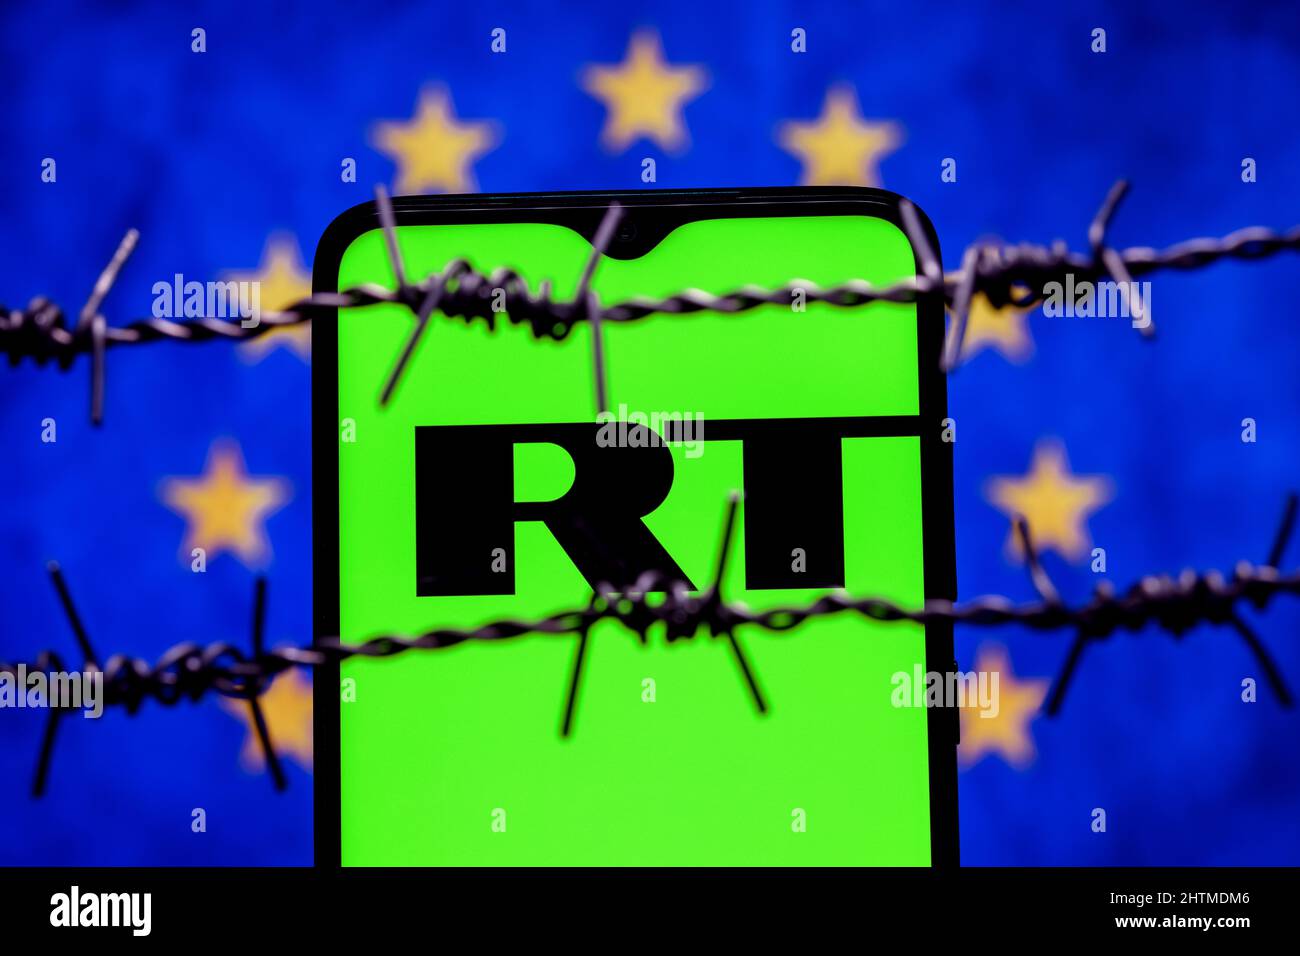 Smartphone with RT (Russia Today) logo on background of flag of European Union behind barbed wire Stock Photo